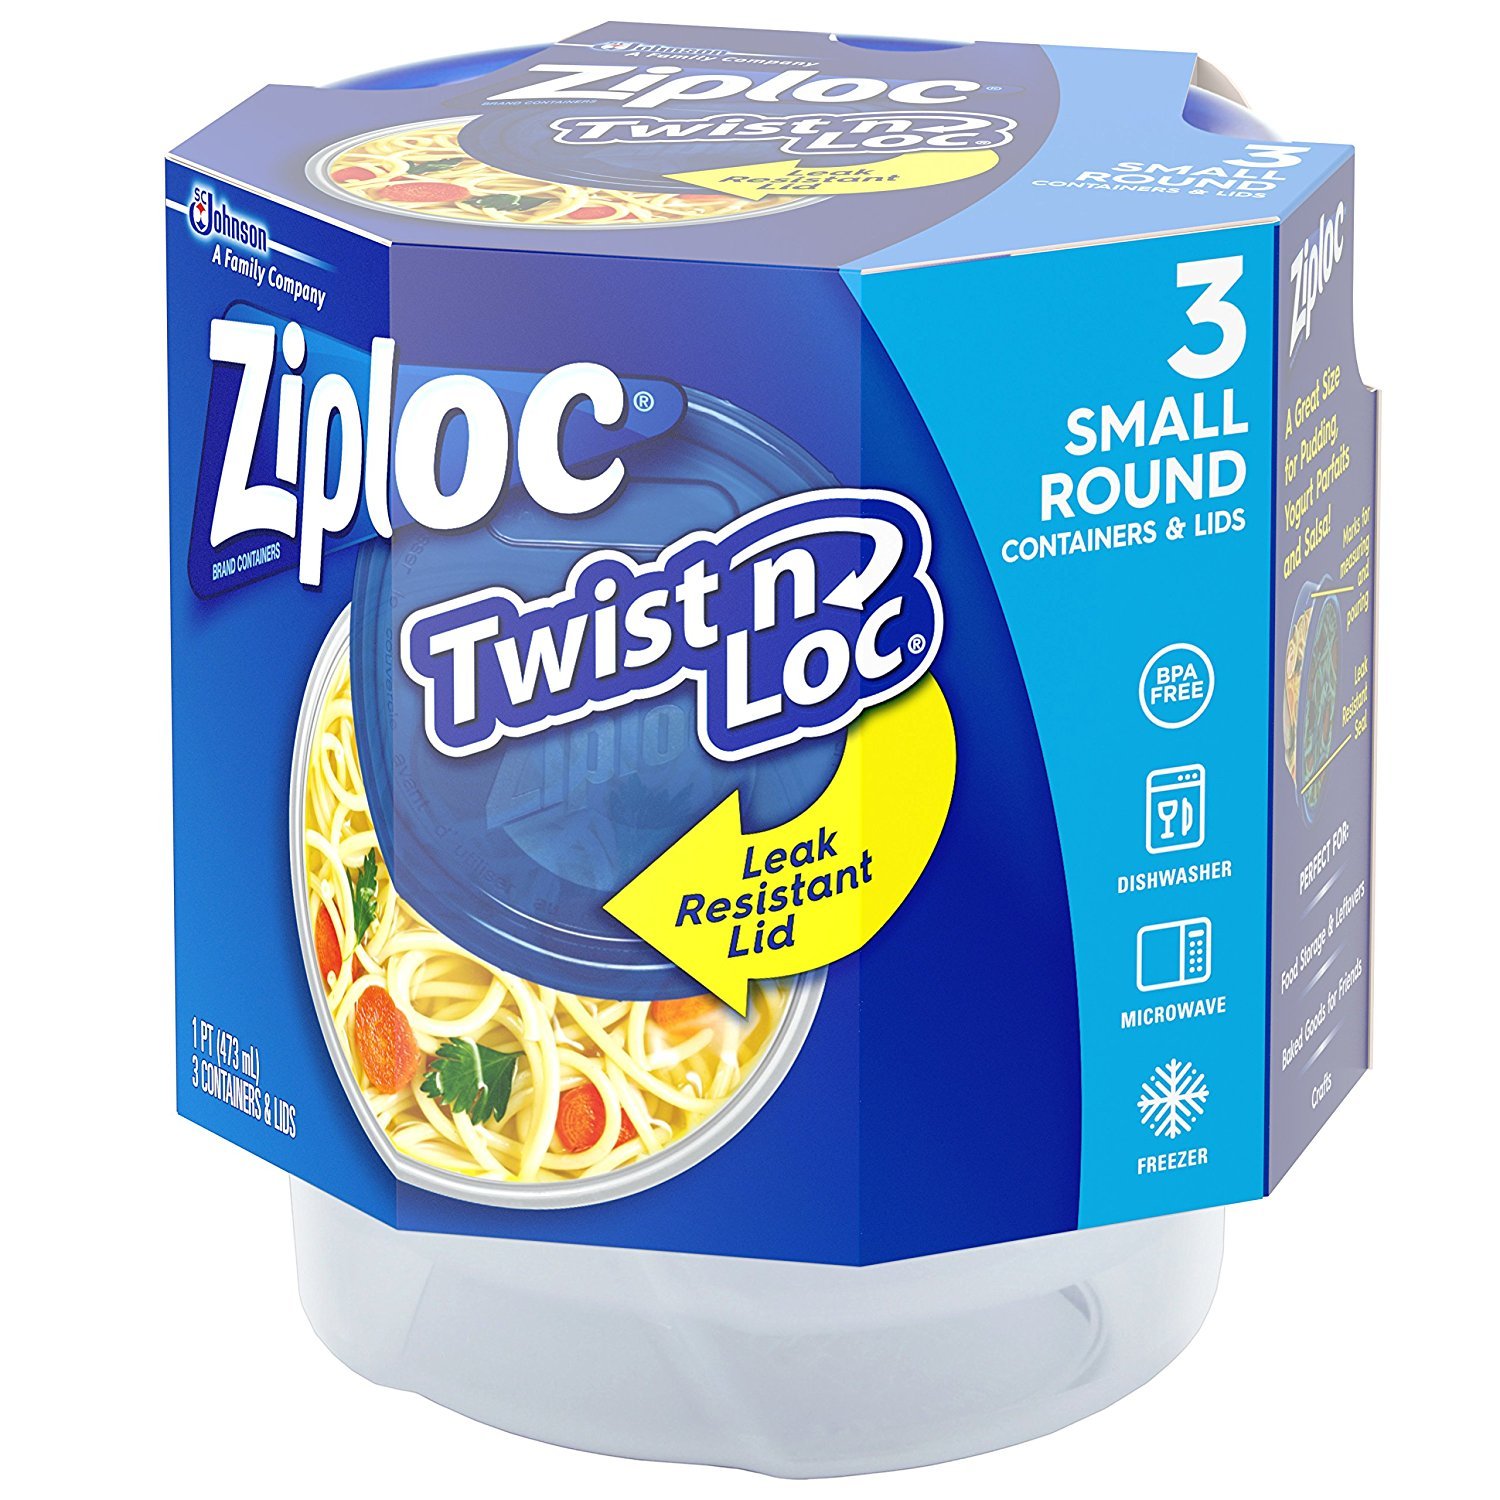 Ziploc® Twist 'n Loc® Small Round Food Storage Containers with Lids, Set of 3 - image 4 of 10